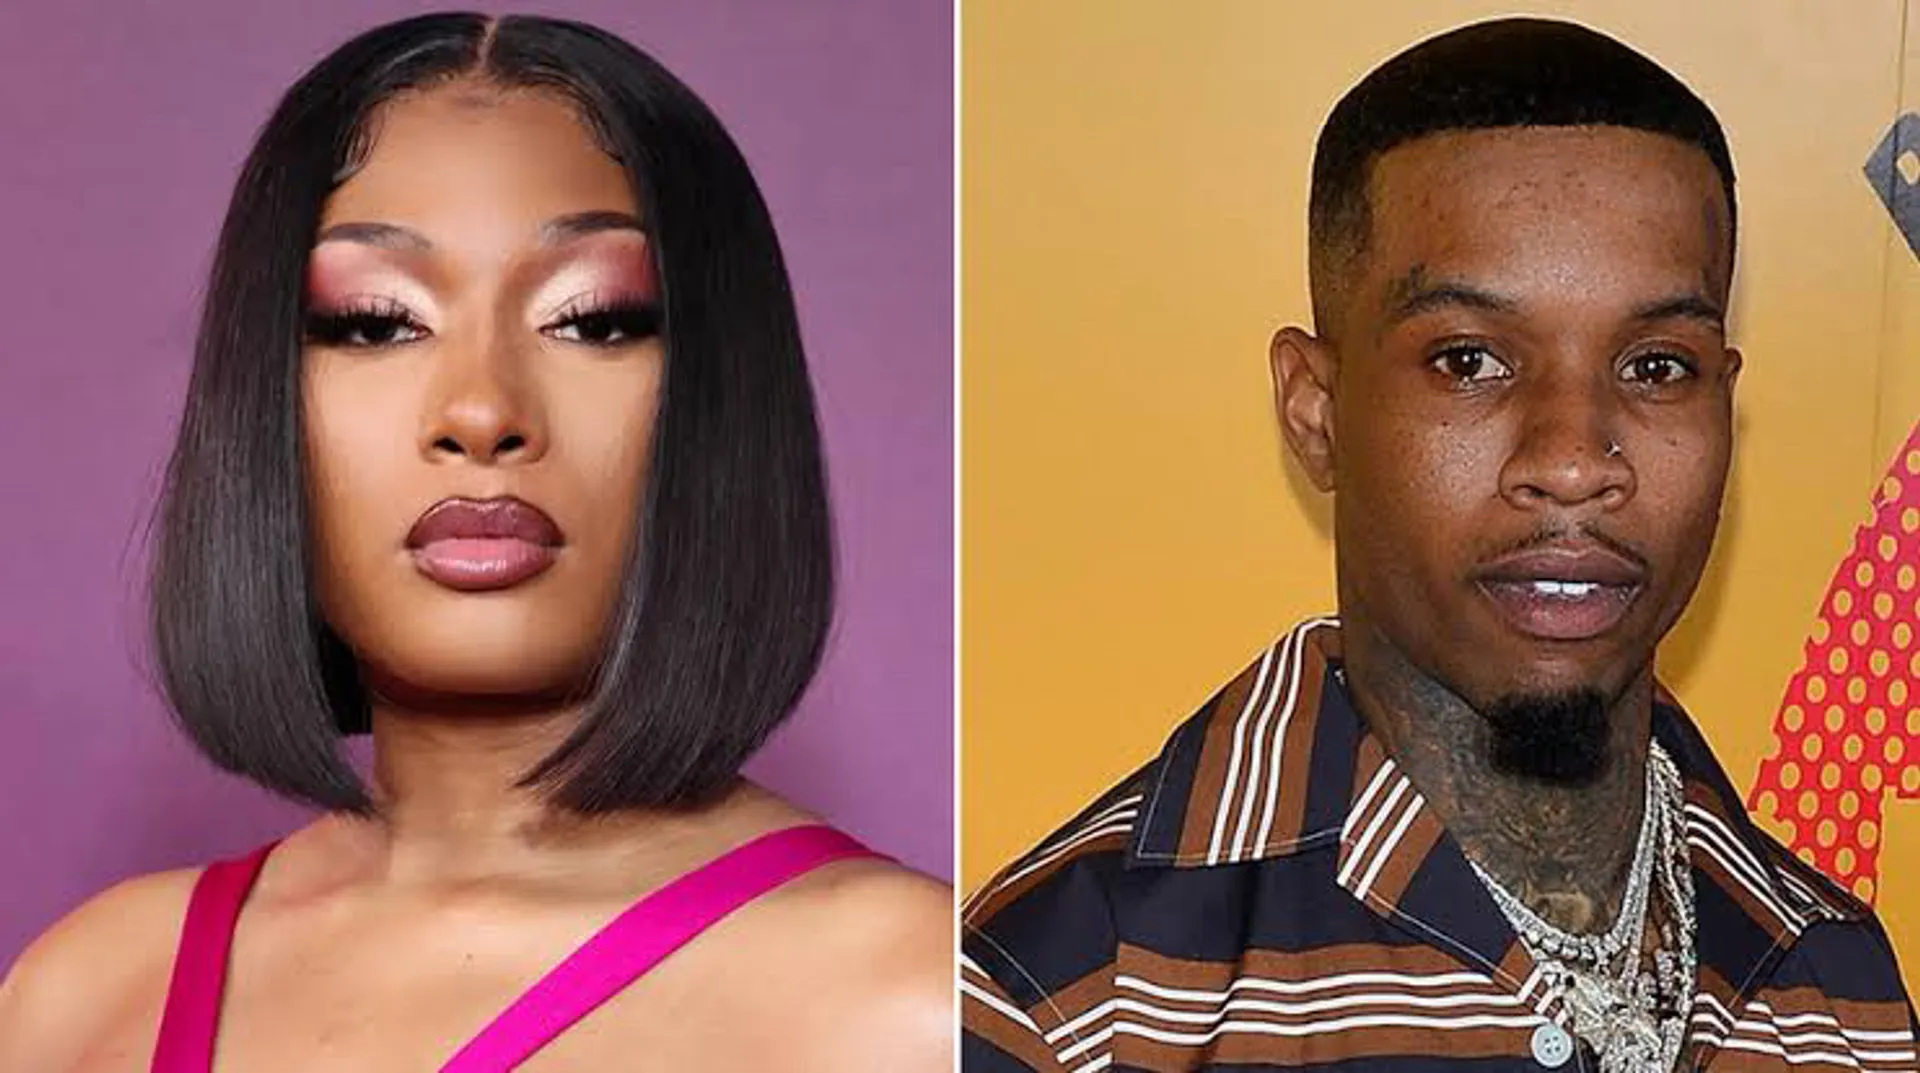 Megan Thee Stallion Gets Bashed Online After Rapper Tory Lanez Was Sentenced To 10 years In Jail For Shooting Her

https://www.myhitjams.com/2023/08/megan-thee-stallion-gets-bashed-online.html